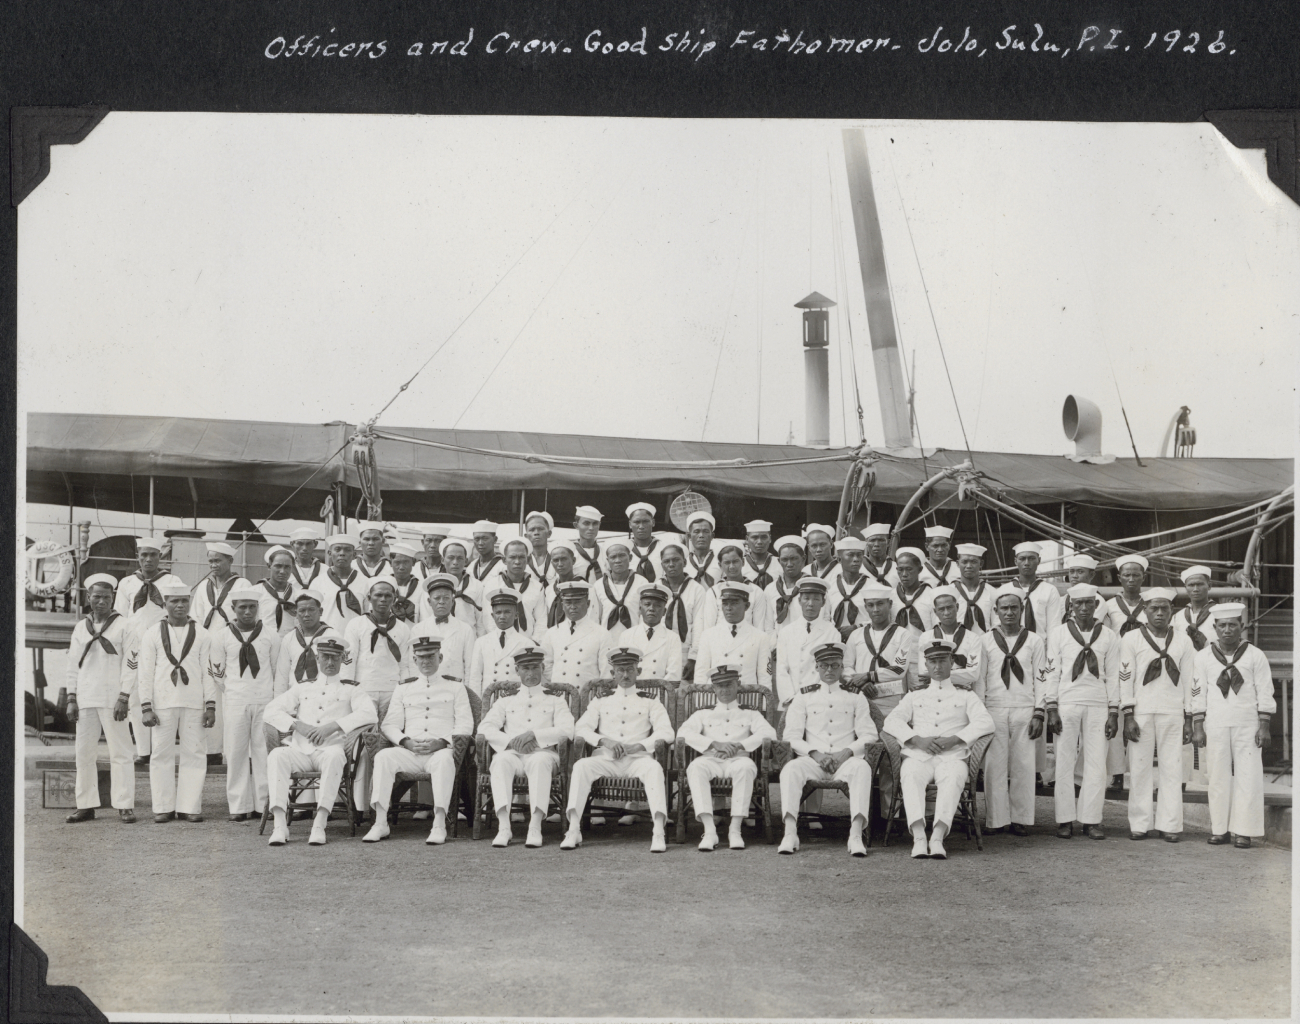 Officers and crew of the FATHOMER at Jolo, Sulu, Philippine Islands